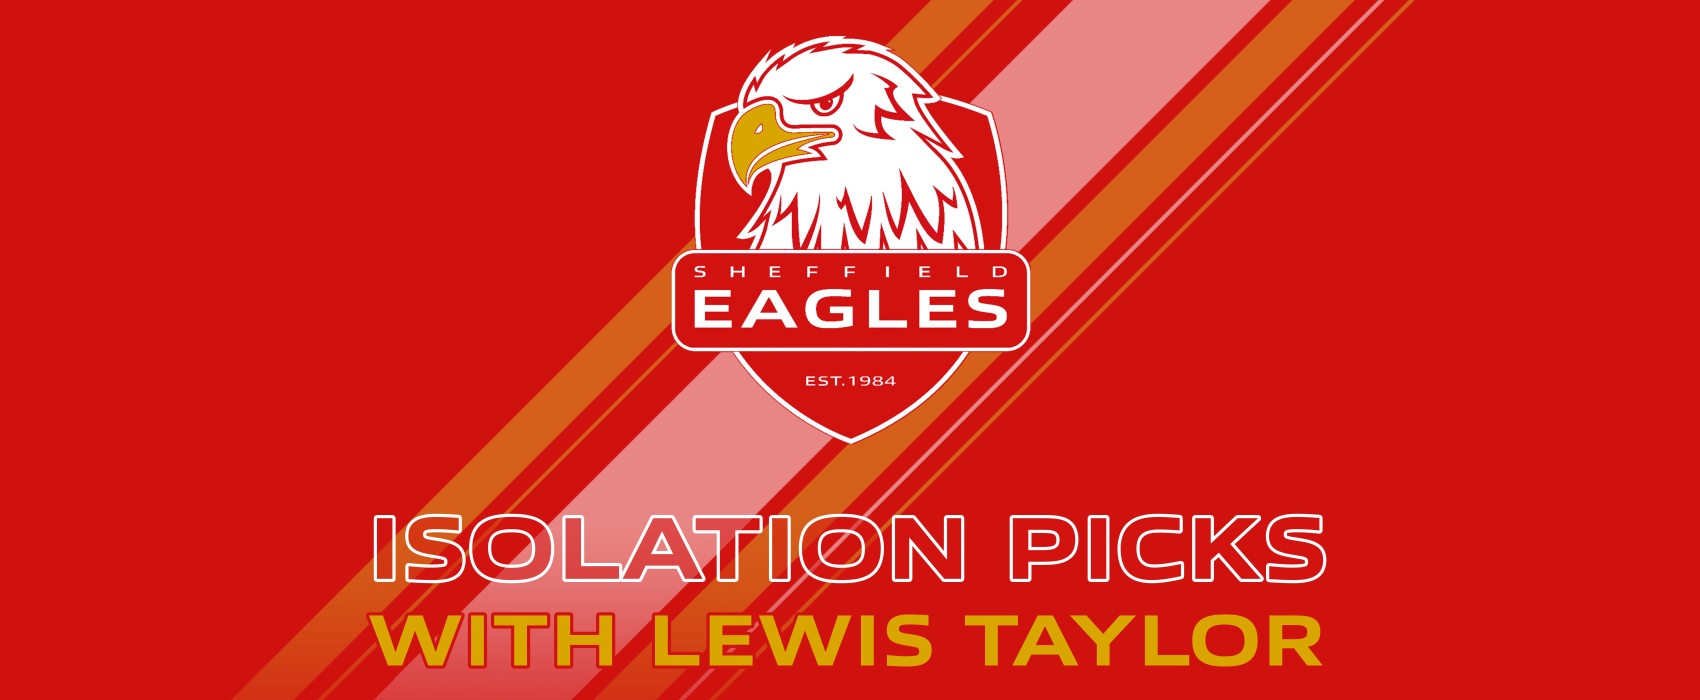 Isolation Picks - By Lewis Taylor